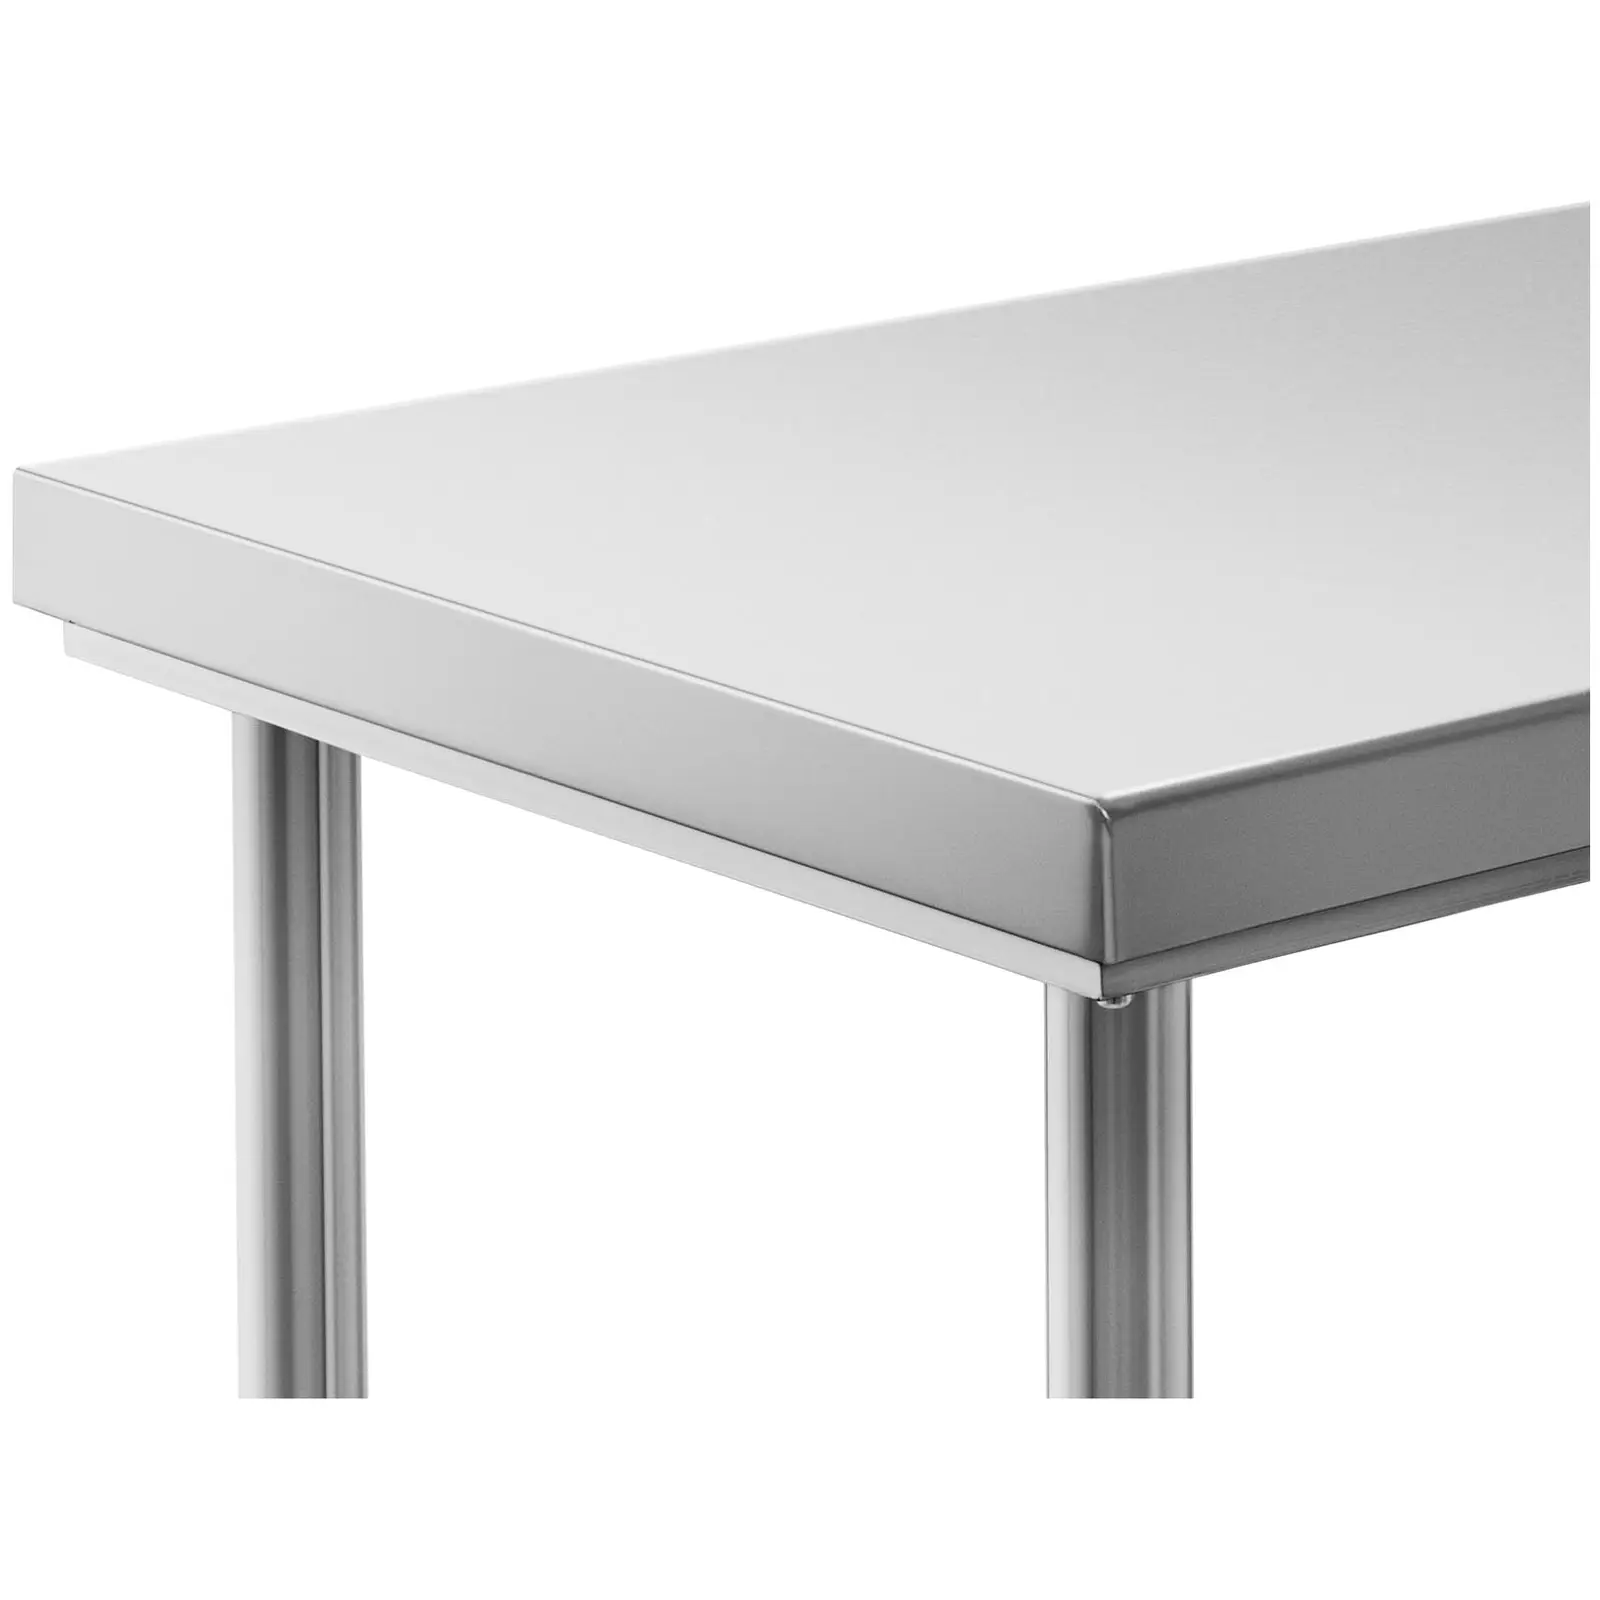 Stainless Steel Work Table - 200 x 60 cm - 240 kg load capacity - Royal Catering